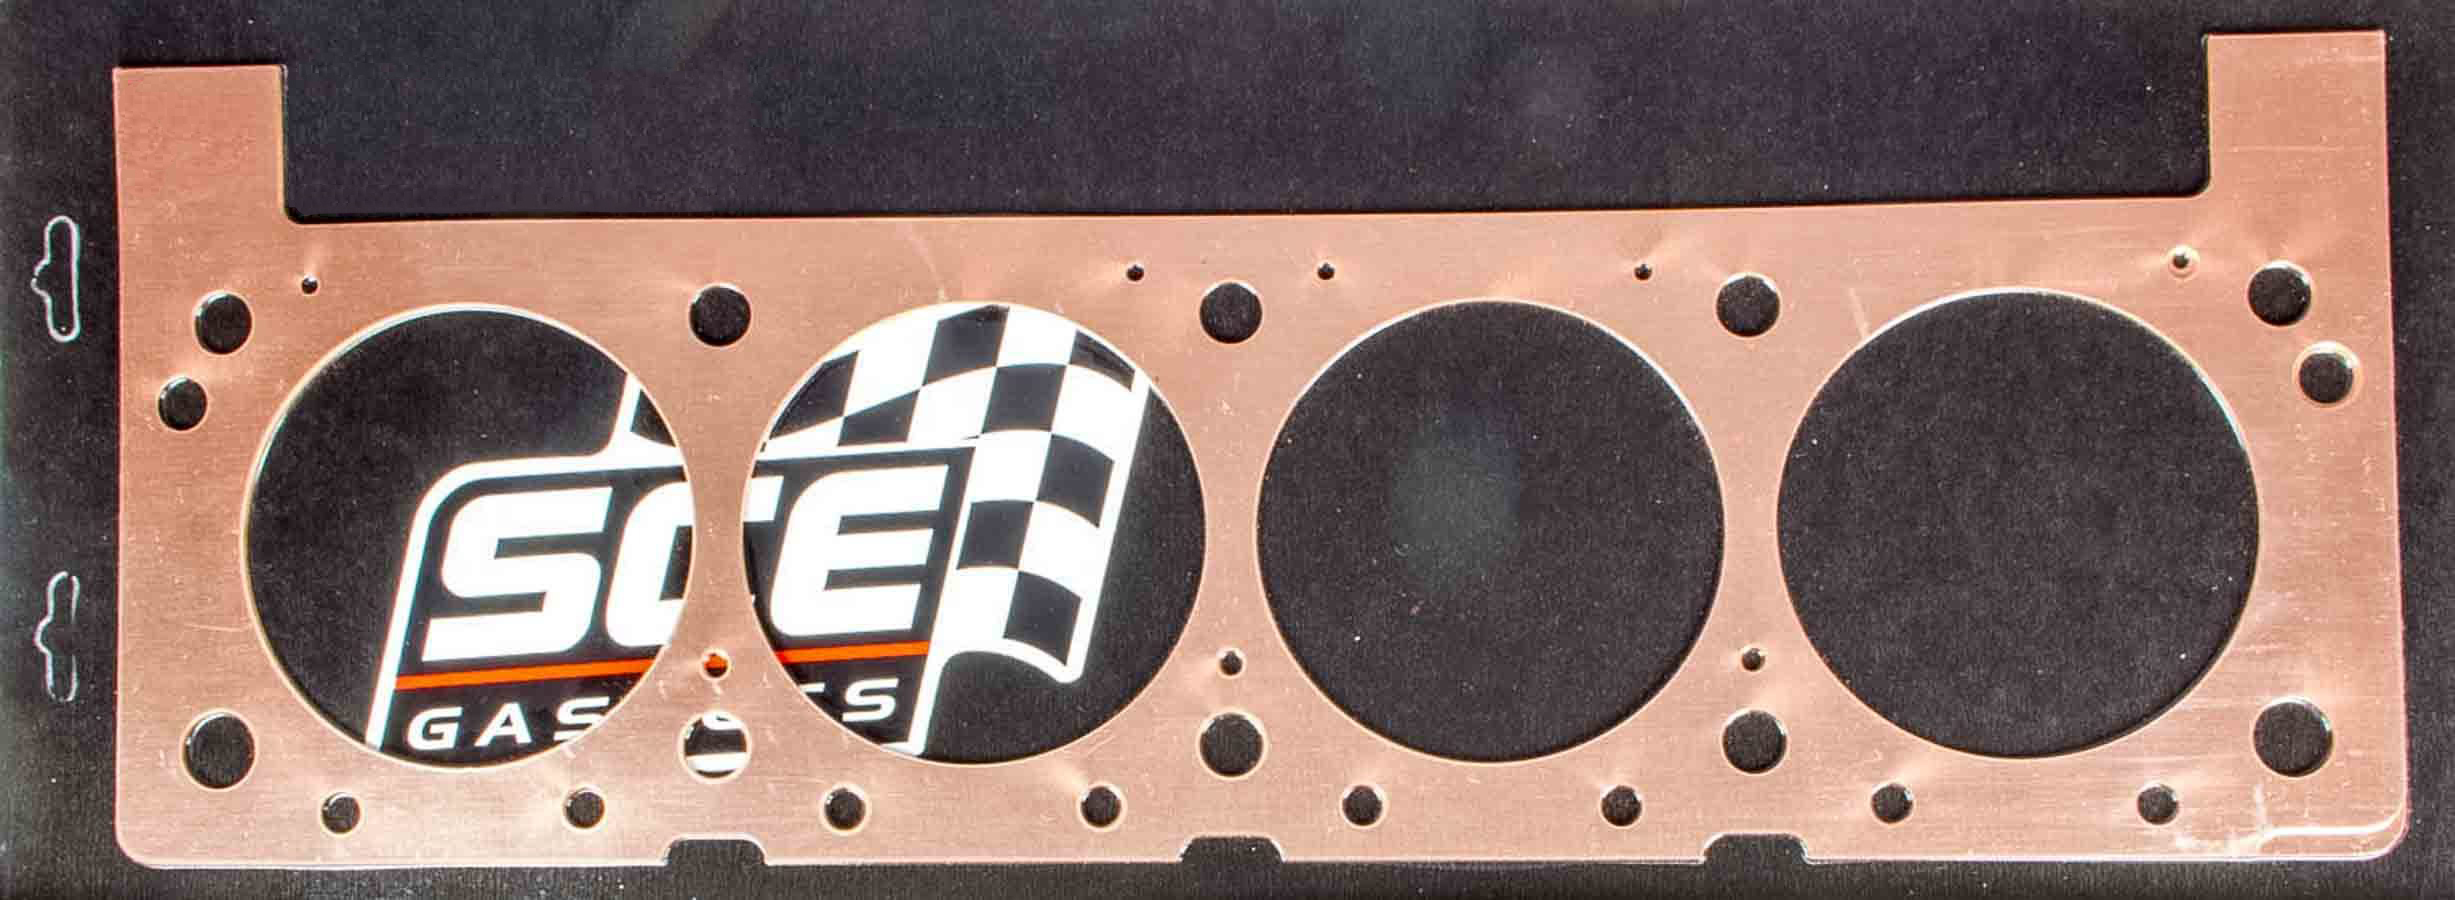 Copper 4.060 in Bore Small Block Chevy Each 0.080 in Compression Thickness Pro Copper Cylinder Head Gasket 